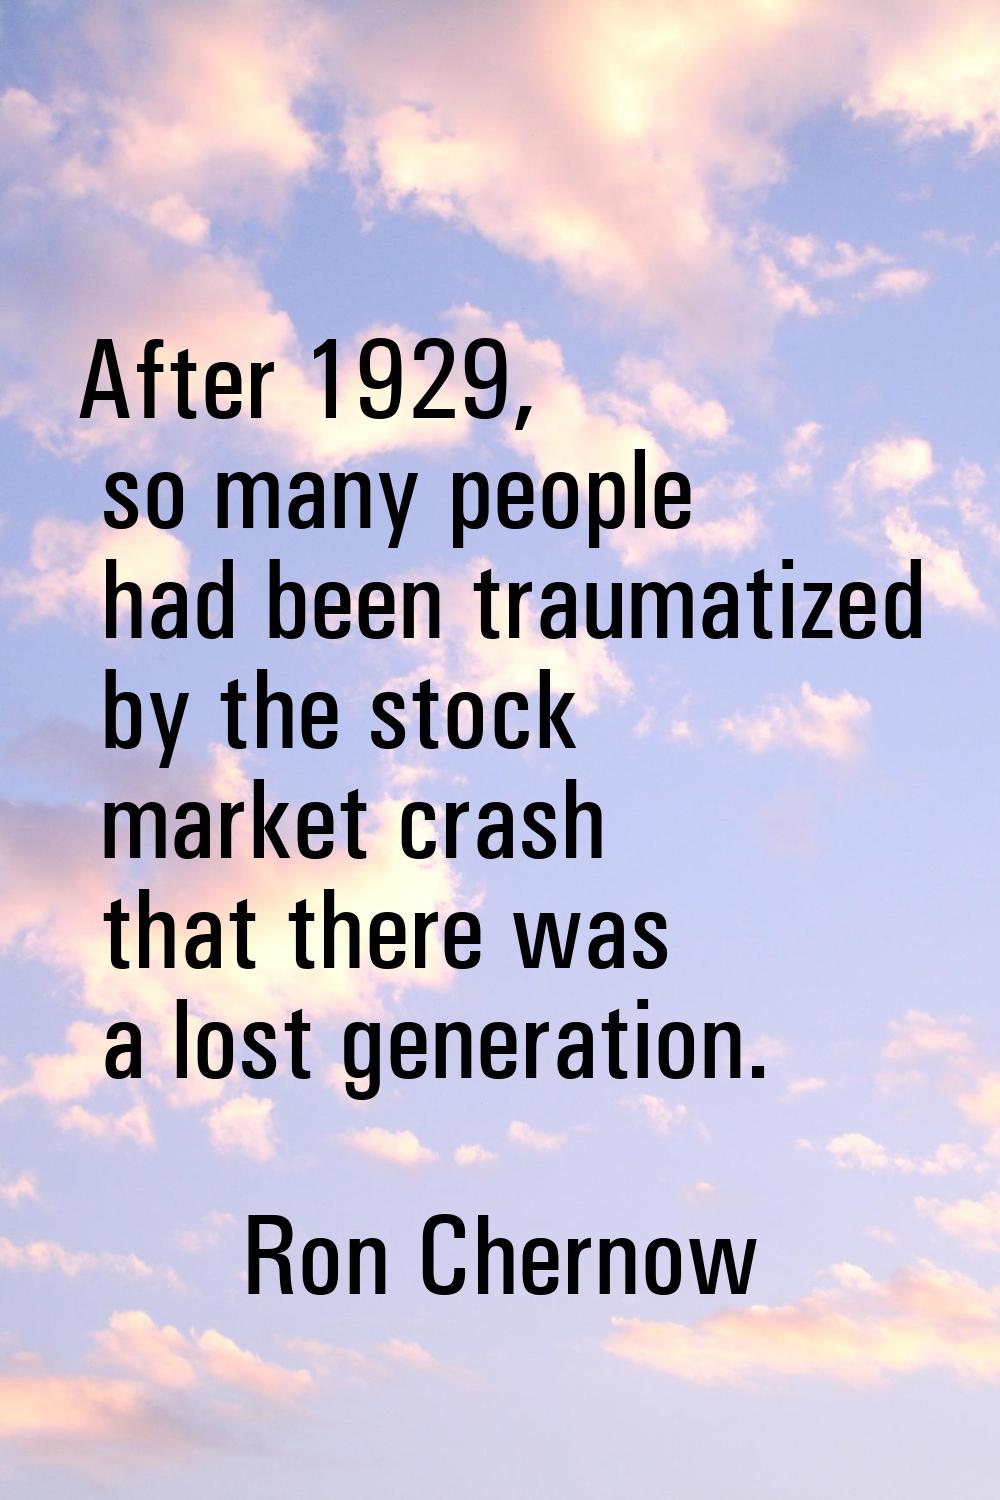 After 1929, so many people had been traumatized by the stock market crash that there was a lost gen